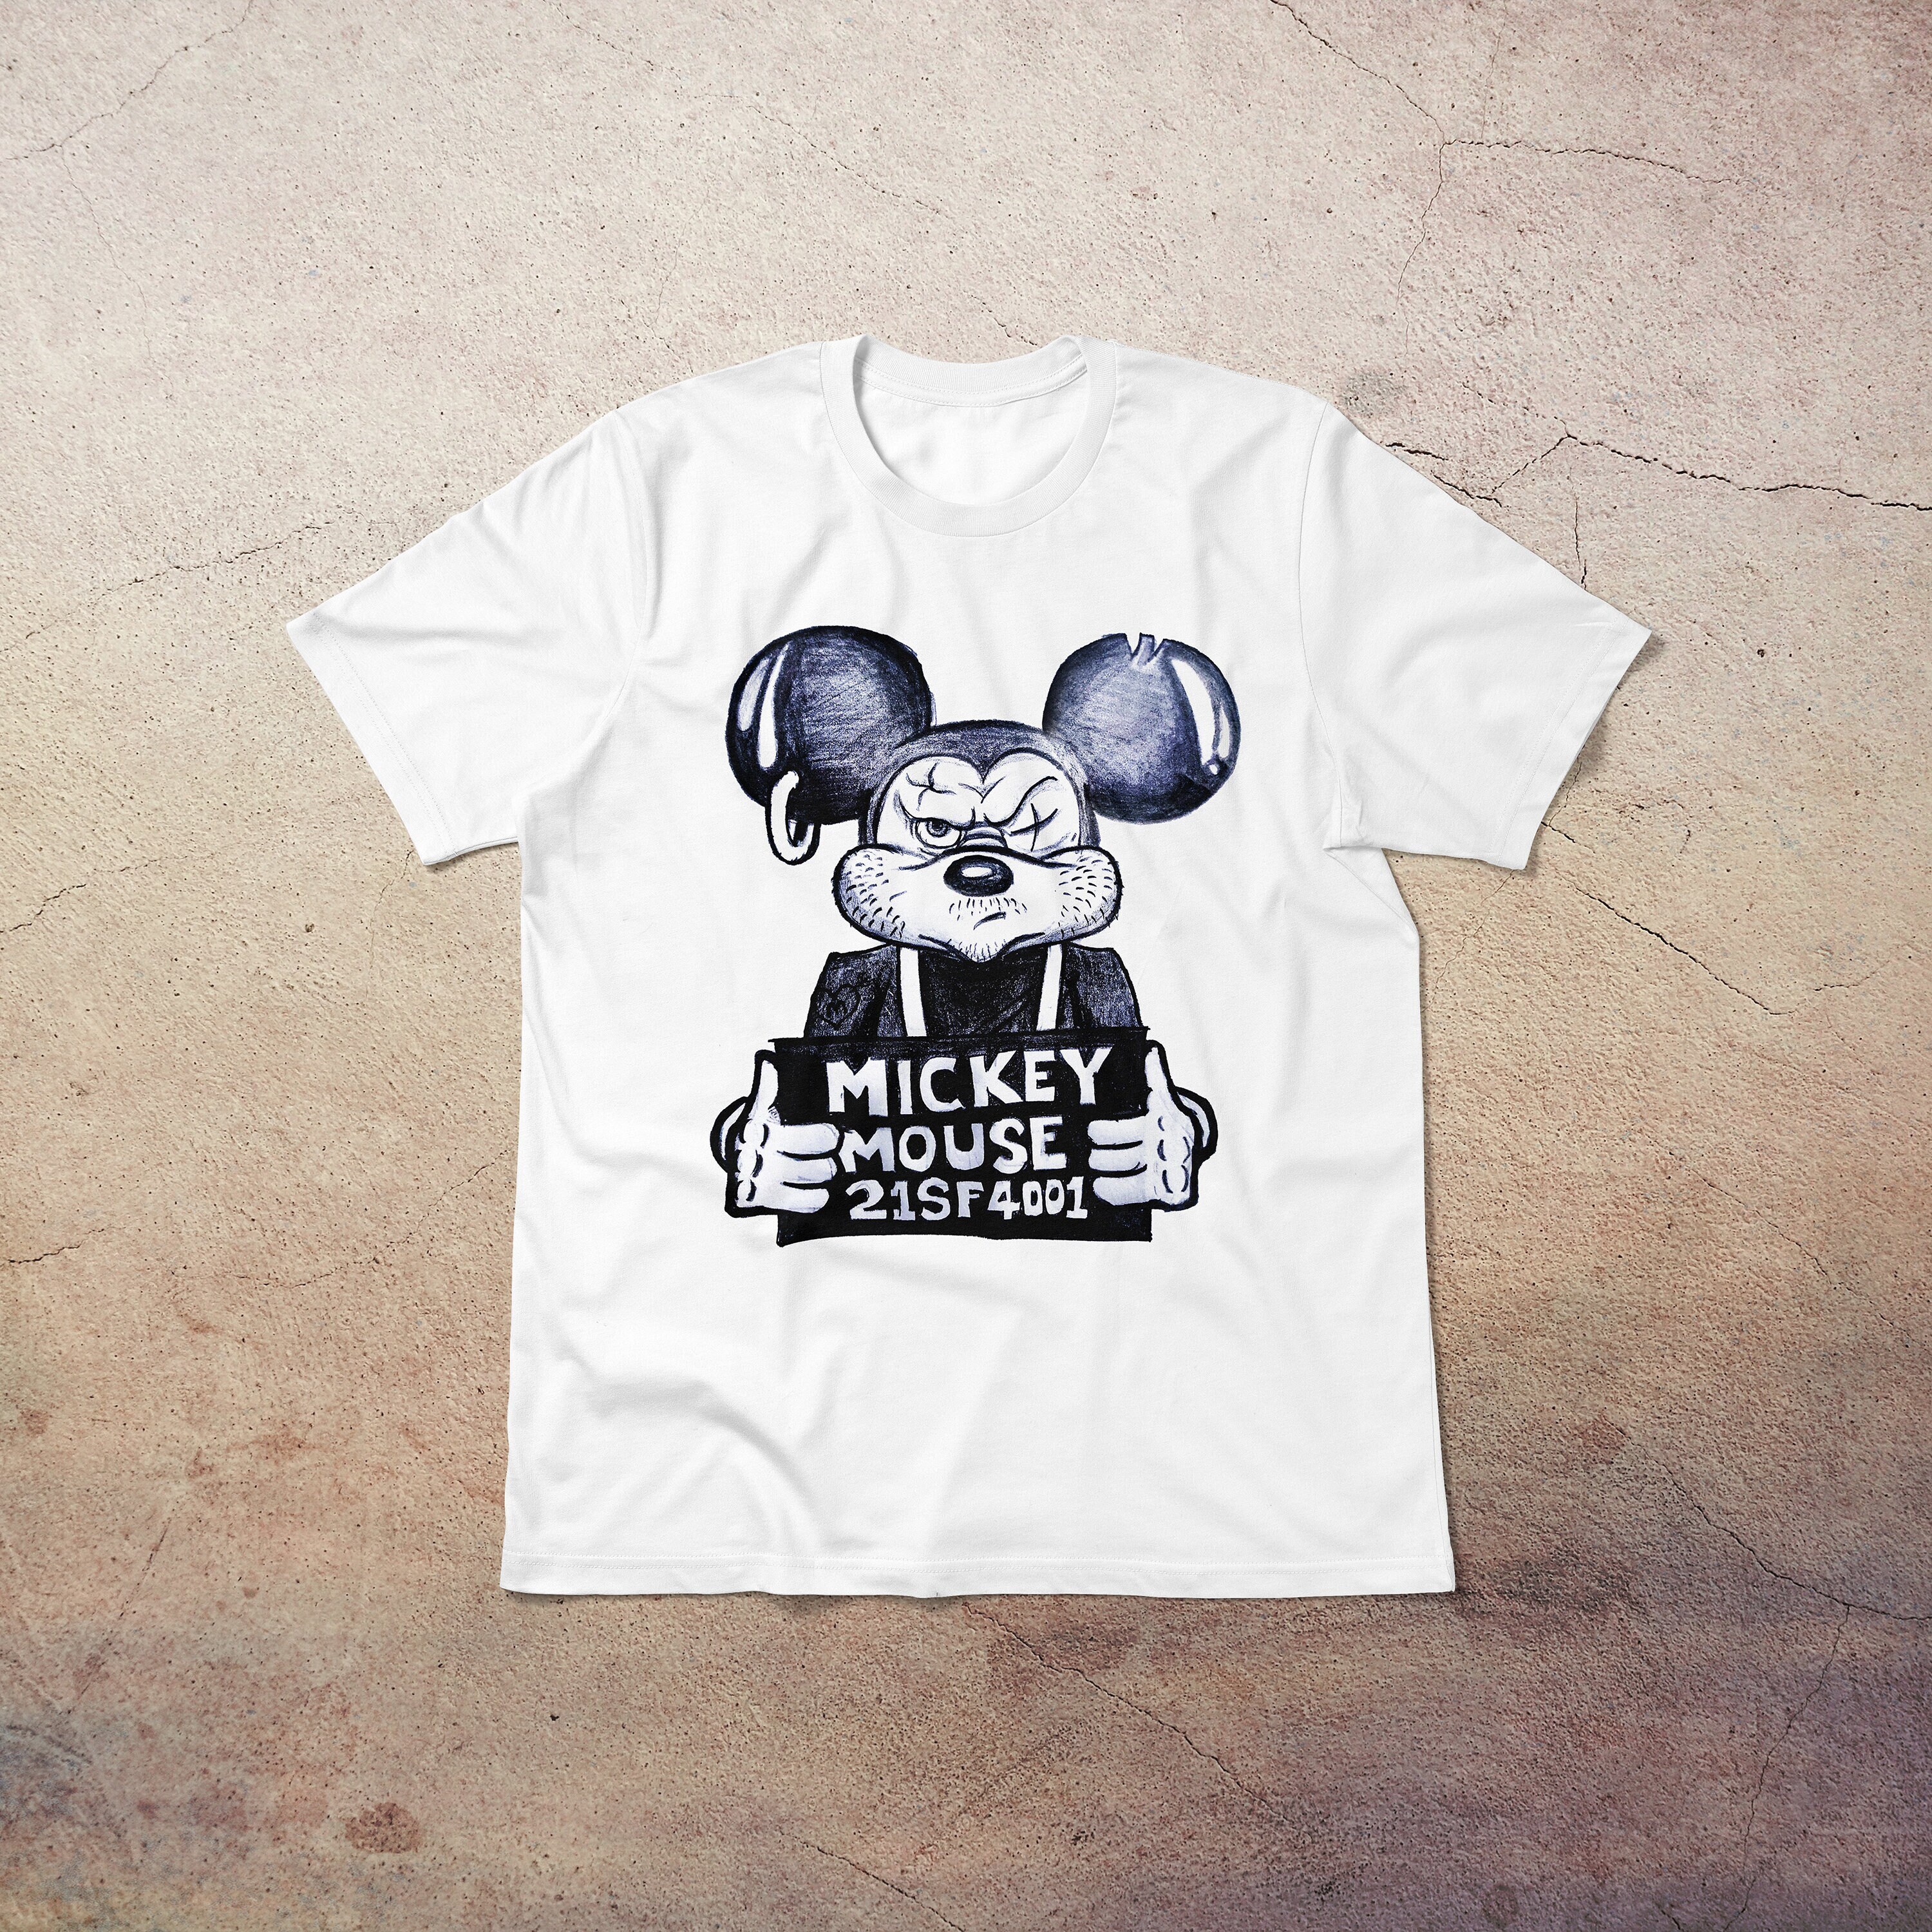 Pencil-drawn Mickey Mouse T-shirt Badass Mickey Mouse - Etsy